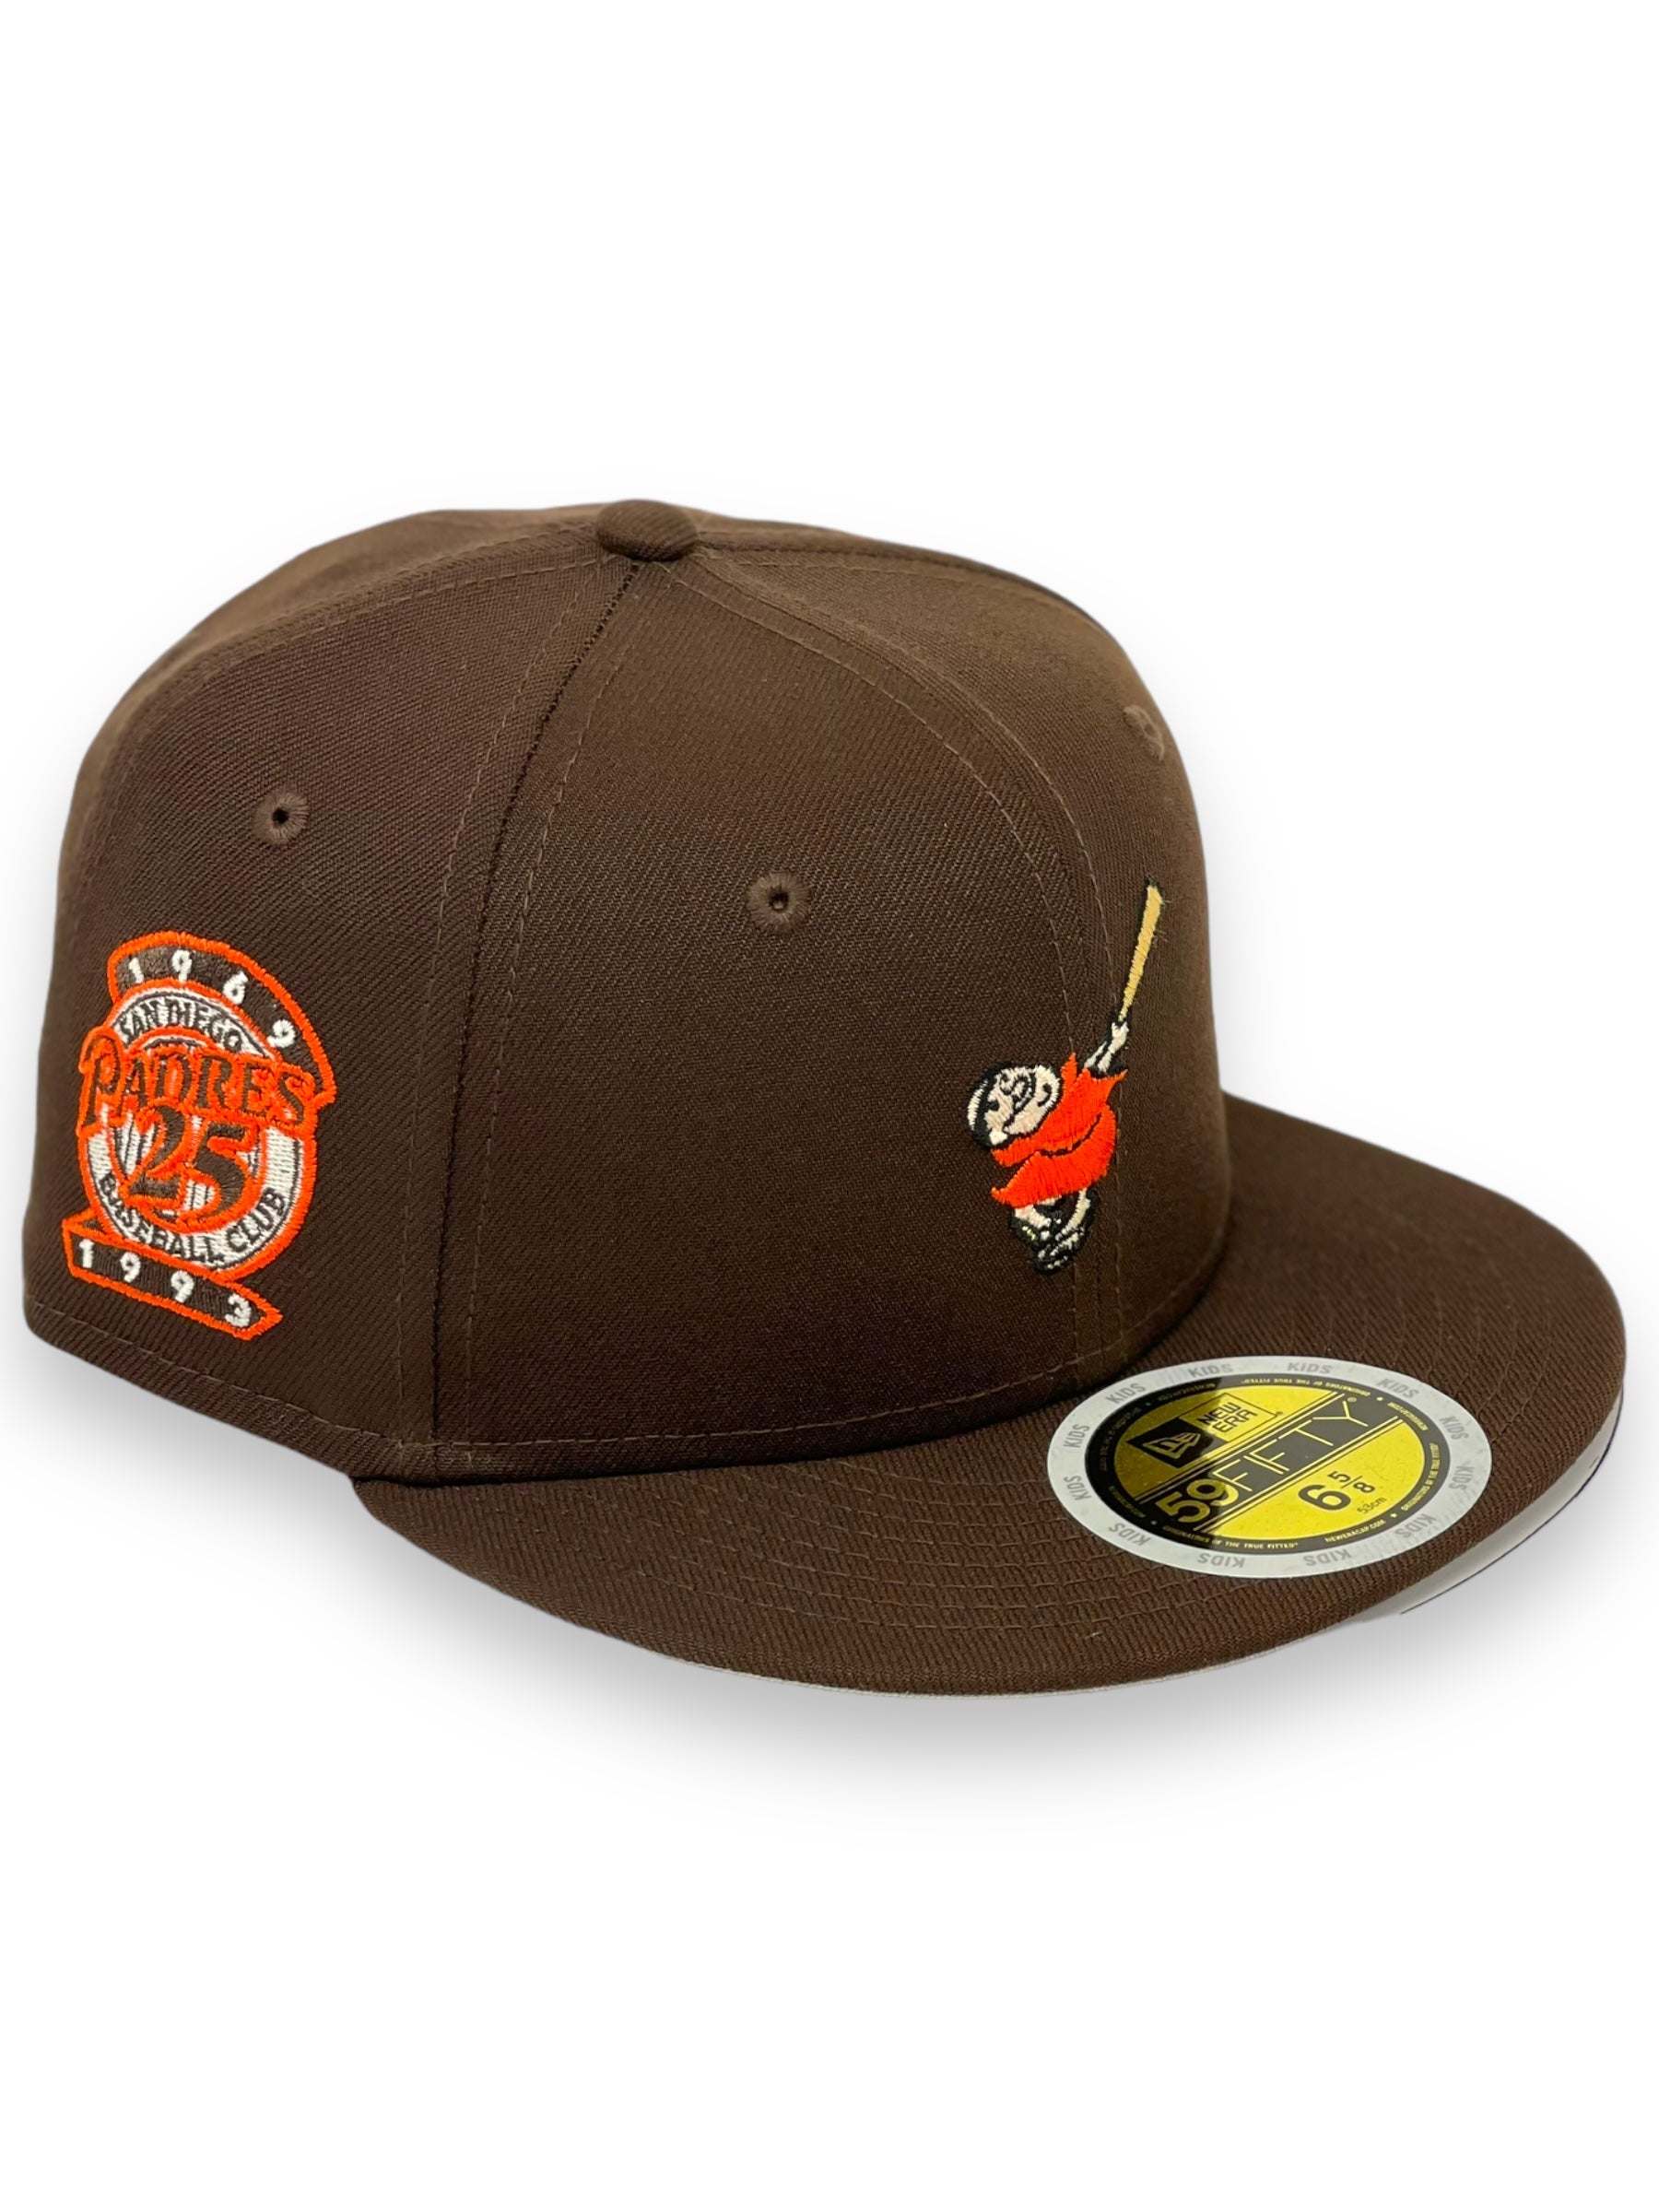 "KIDS" SAN DIEGO PADRES (BROWN)(25TH ANN) NEW ERA 59FIFTY FITTED